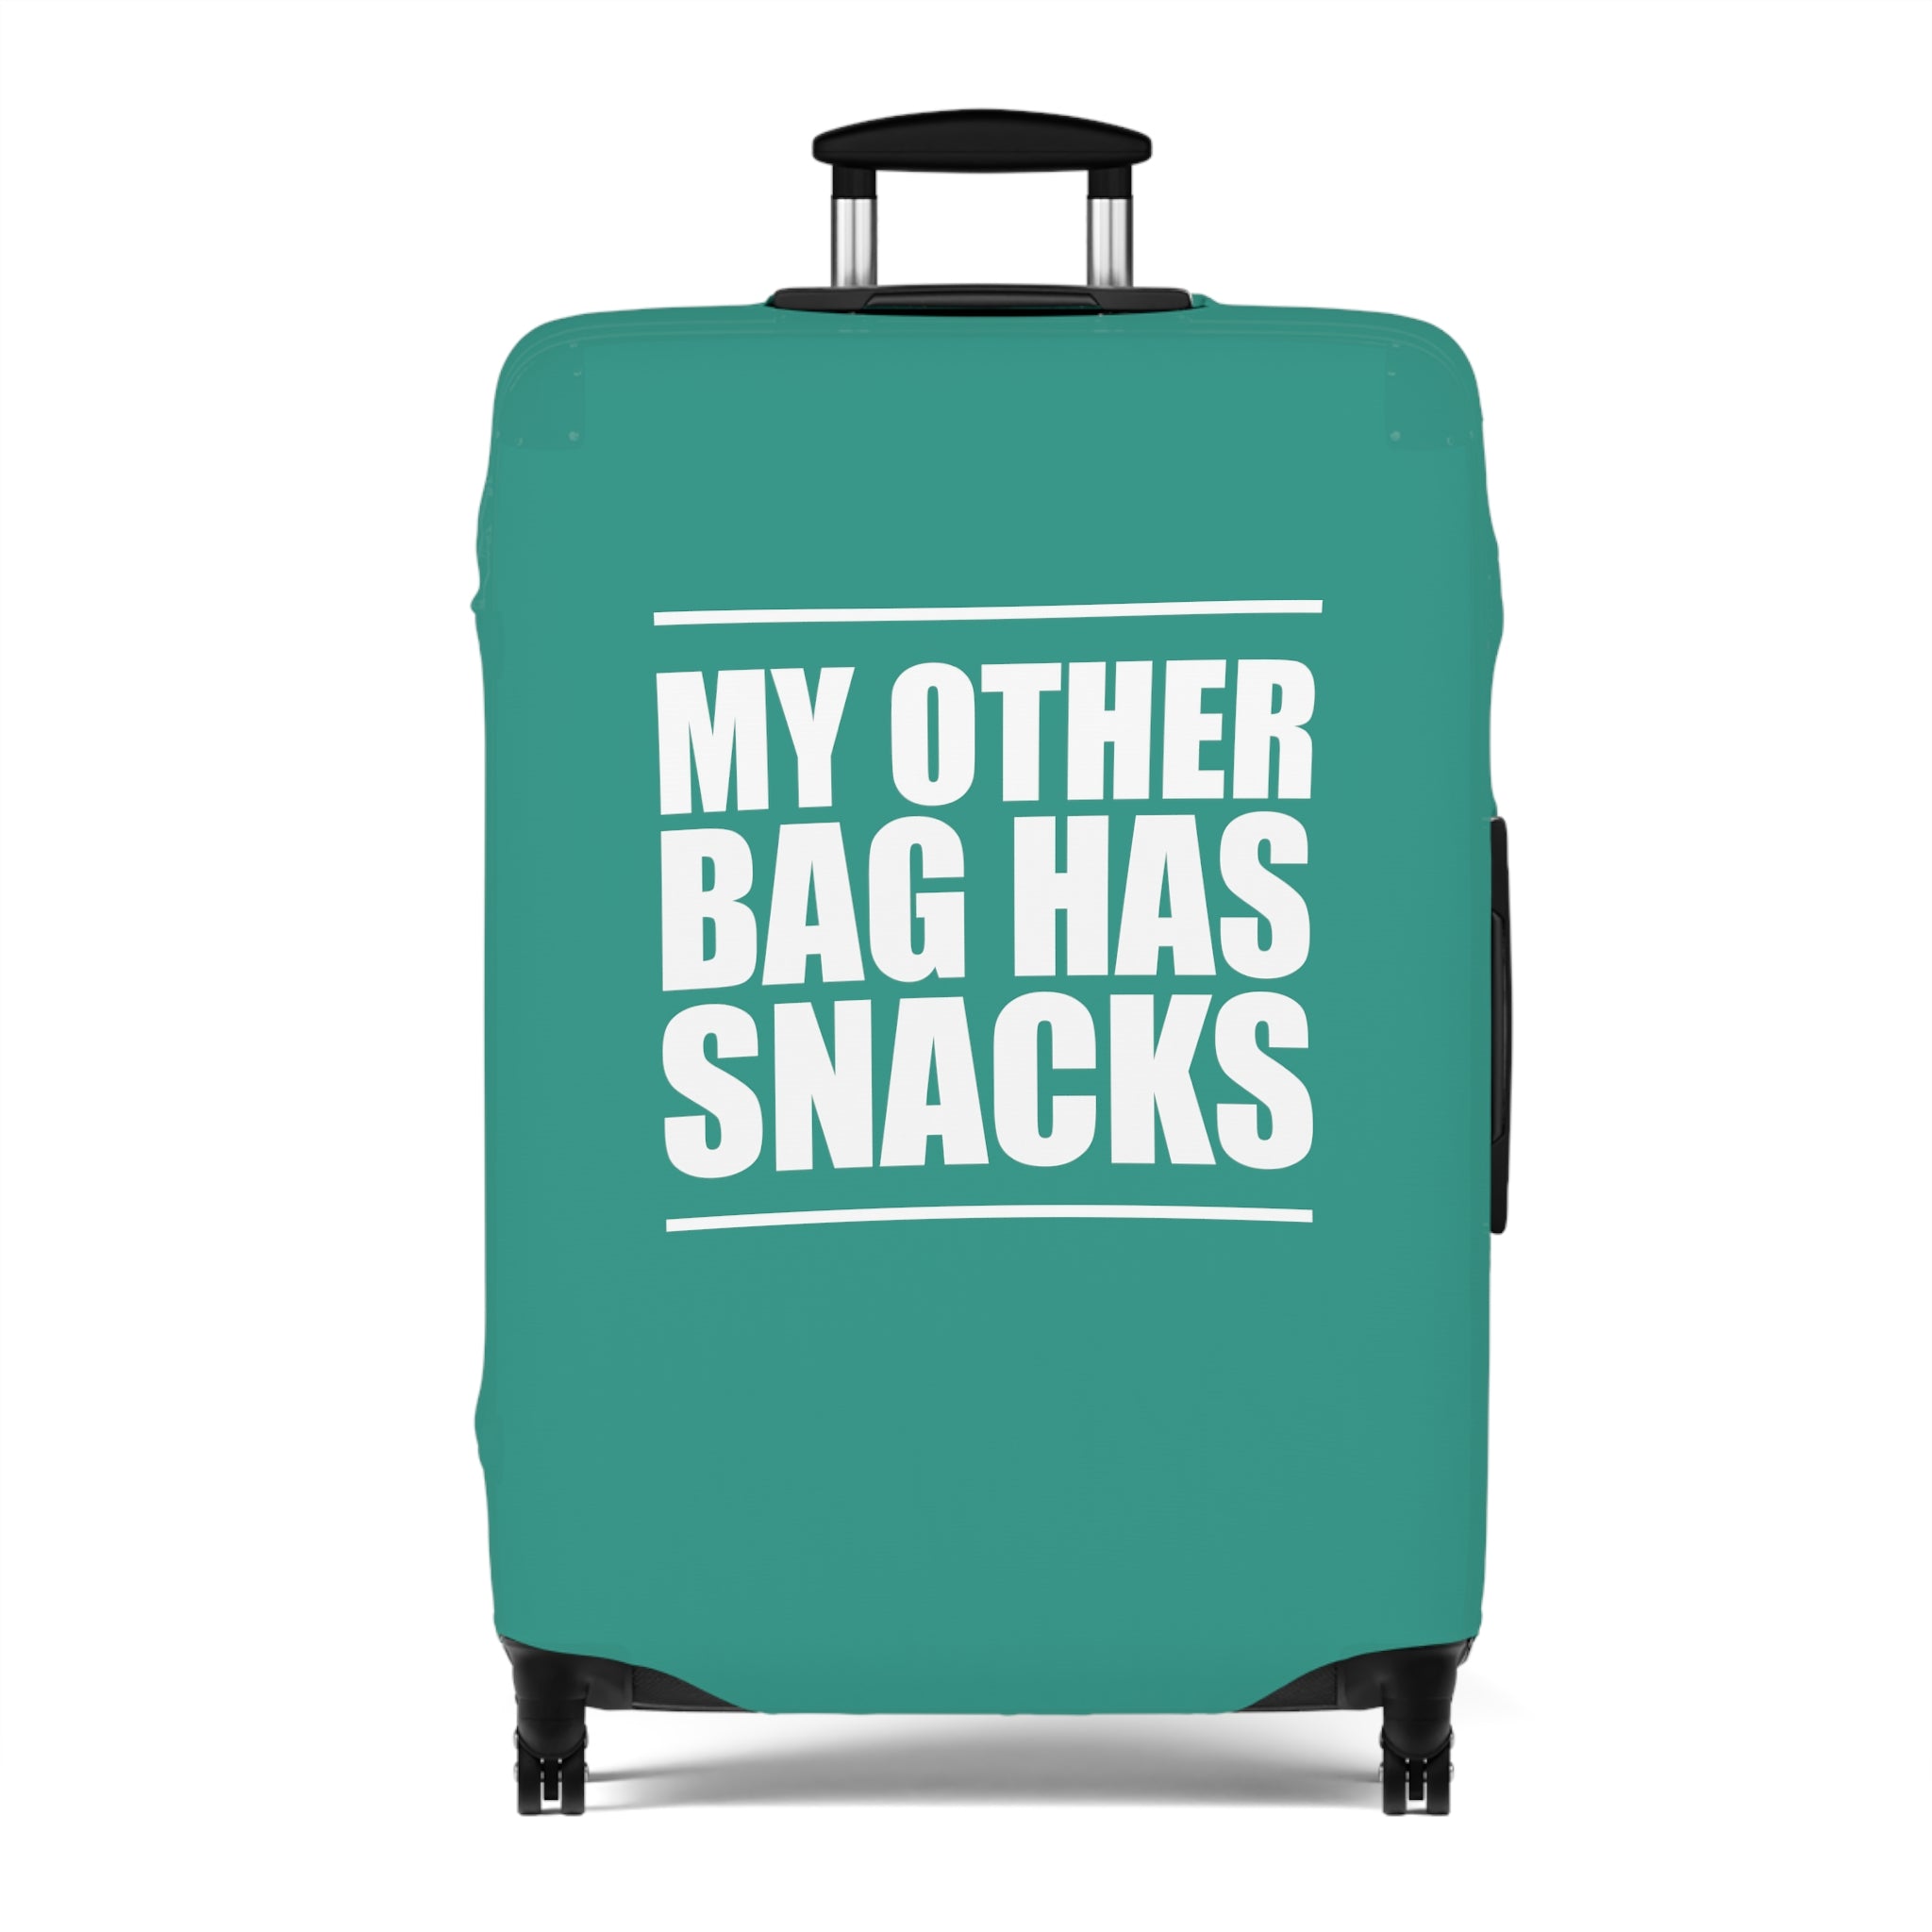 My other bag has snacks Luggage Cover (Green)